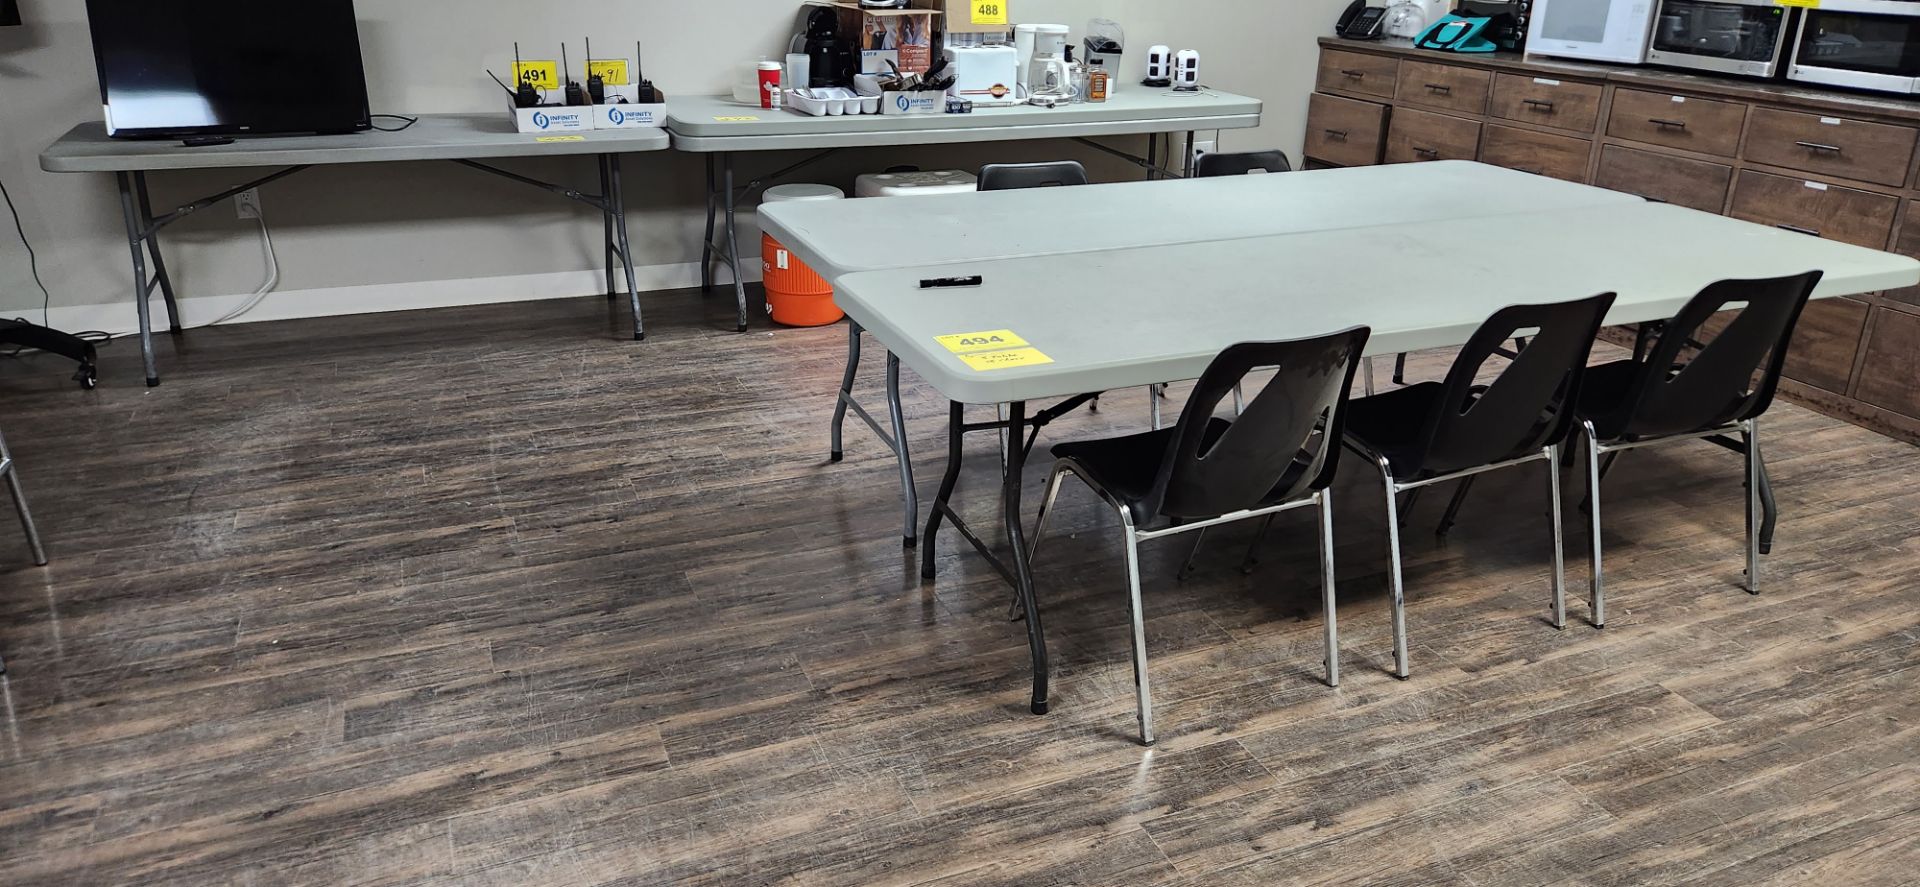 LOT OF ASST. FOLDING TABLES W/ CHAIRS